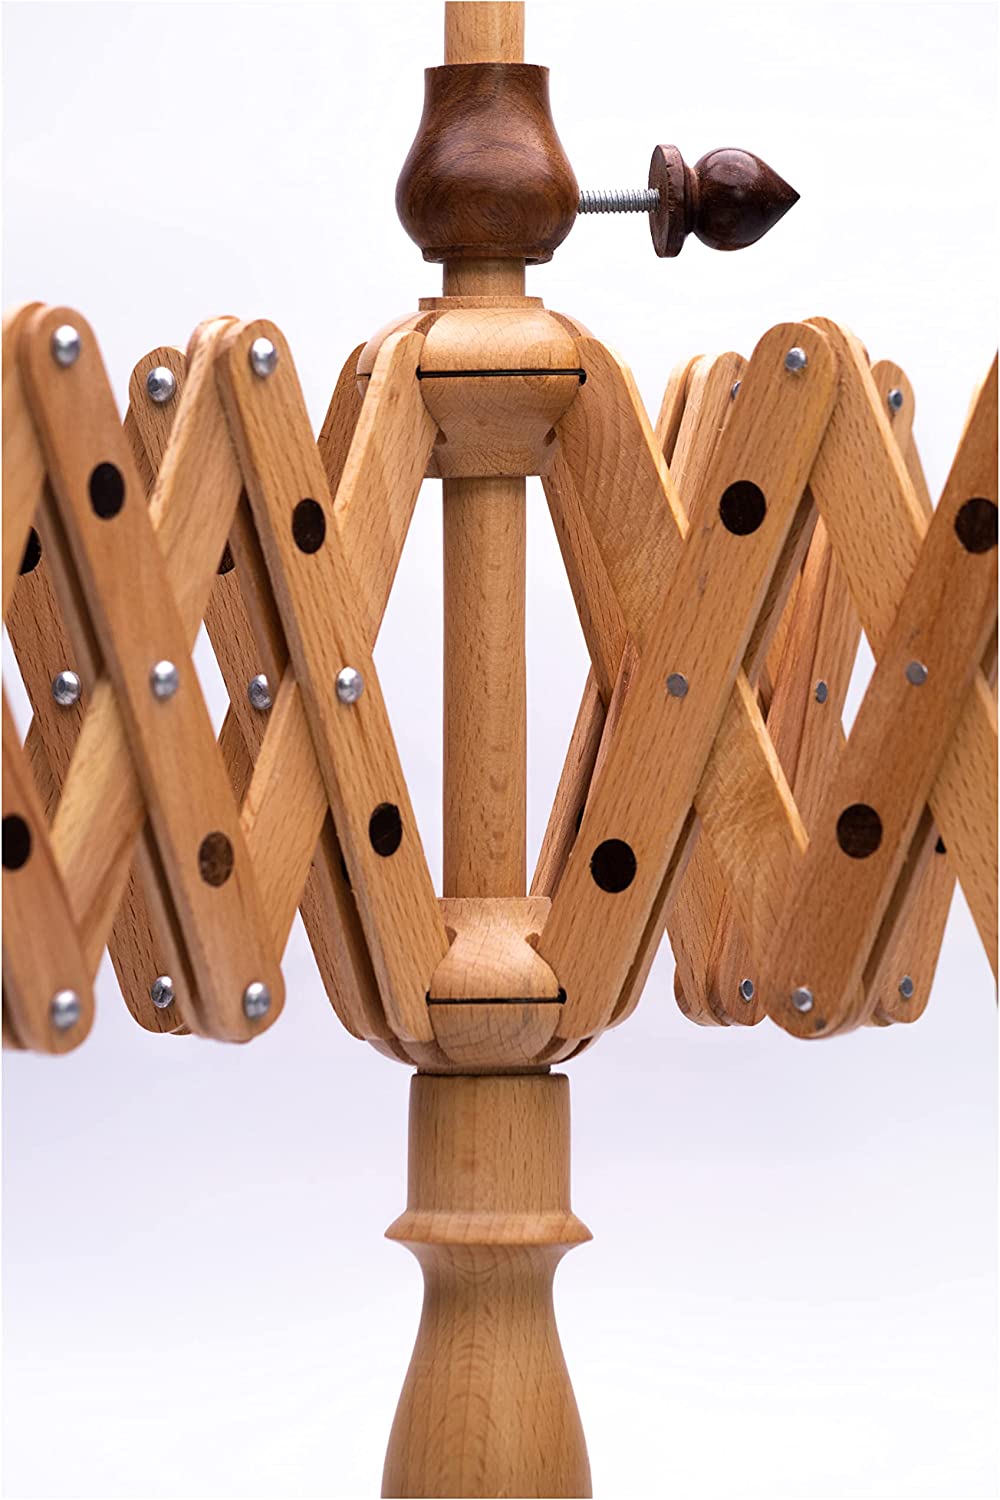  Wooden Yarn Winder and Swift for Crocheting, Knitting